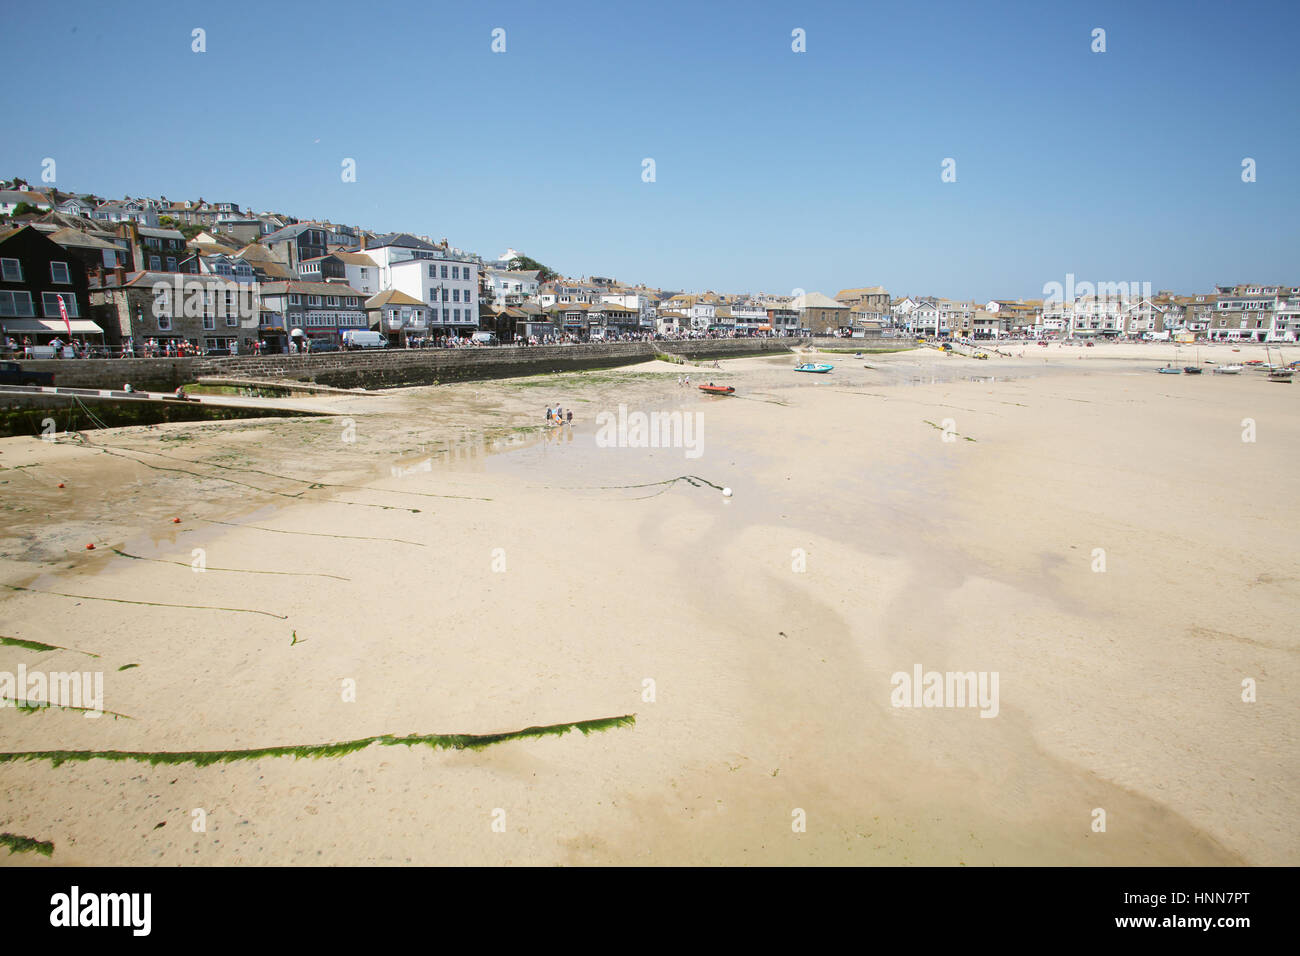 ST IVES Cornwall England 2013 Seaside resort and holiday resort at the English south coast 2013 people out at beach at low tide Stock Photo